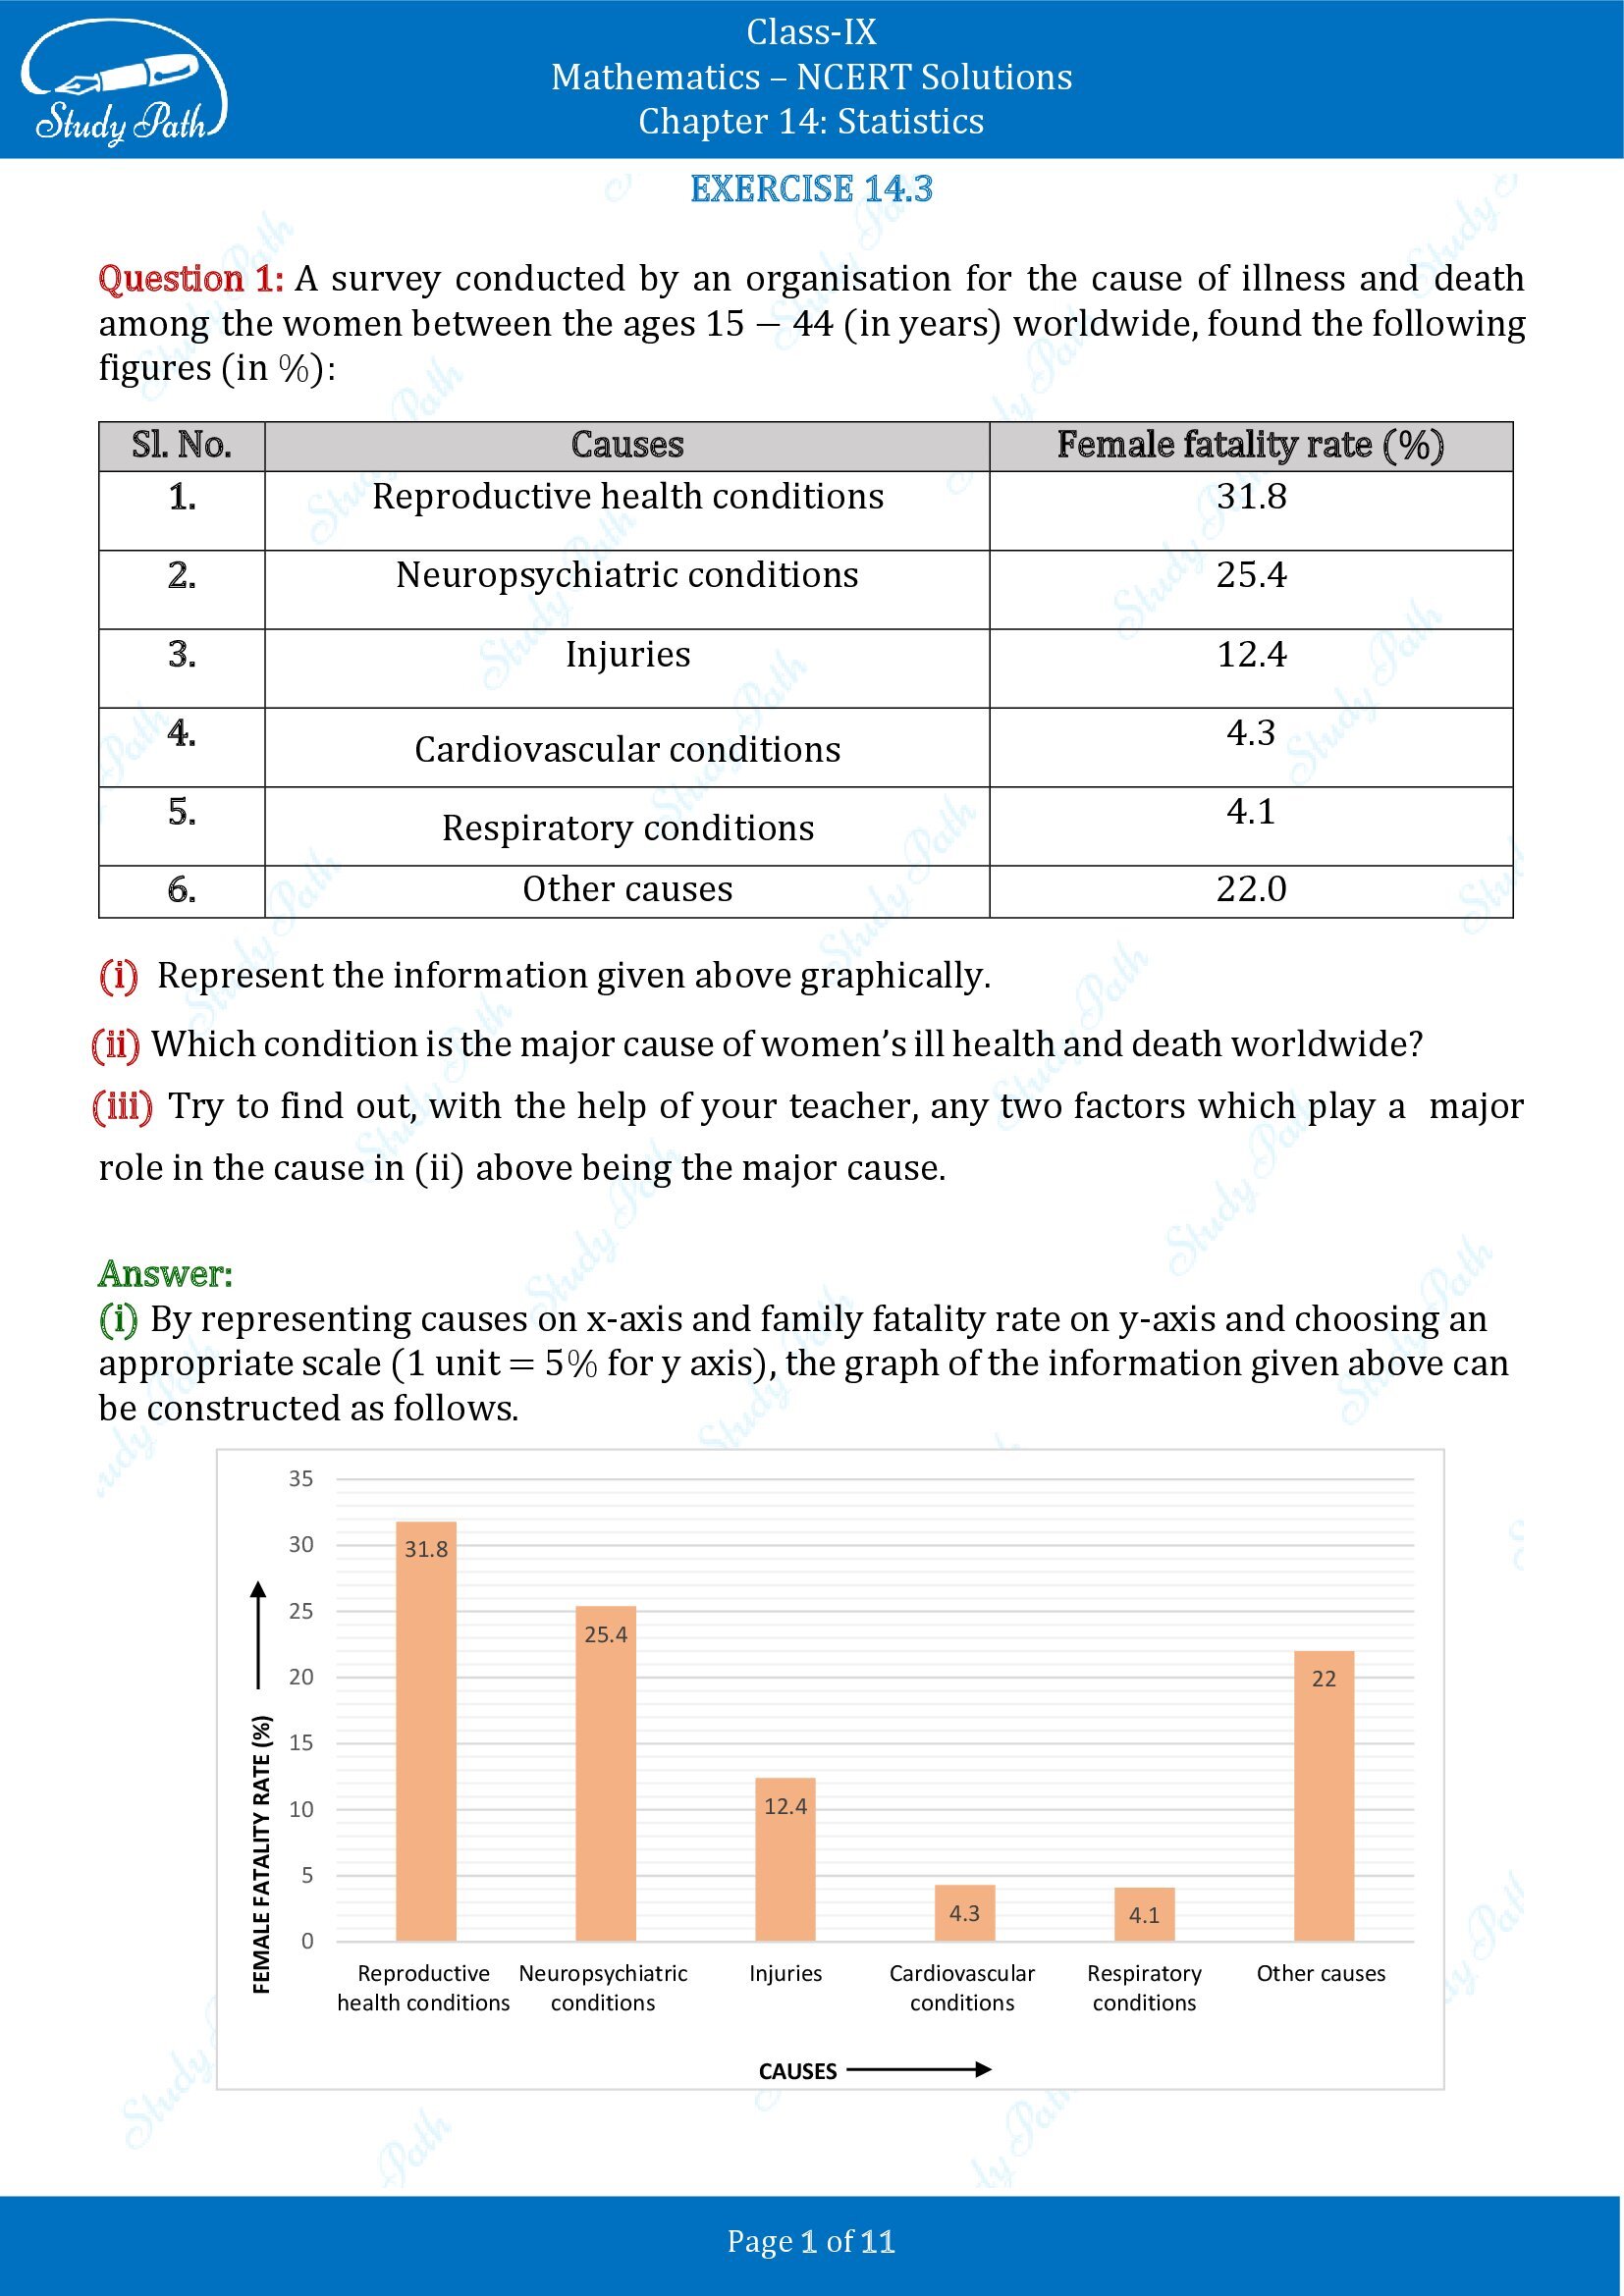 NCERT Solutions for Class 9 Maths Chapter 14 Statistics Exercise 14.3 00001